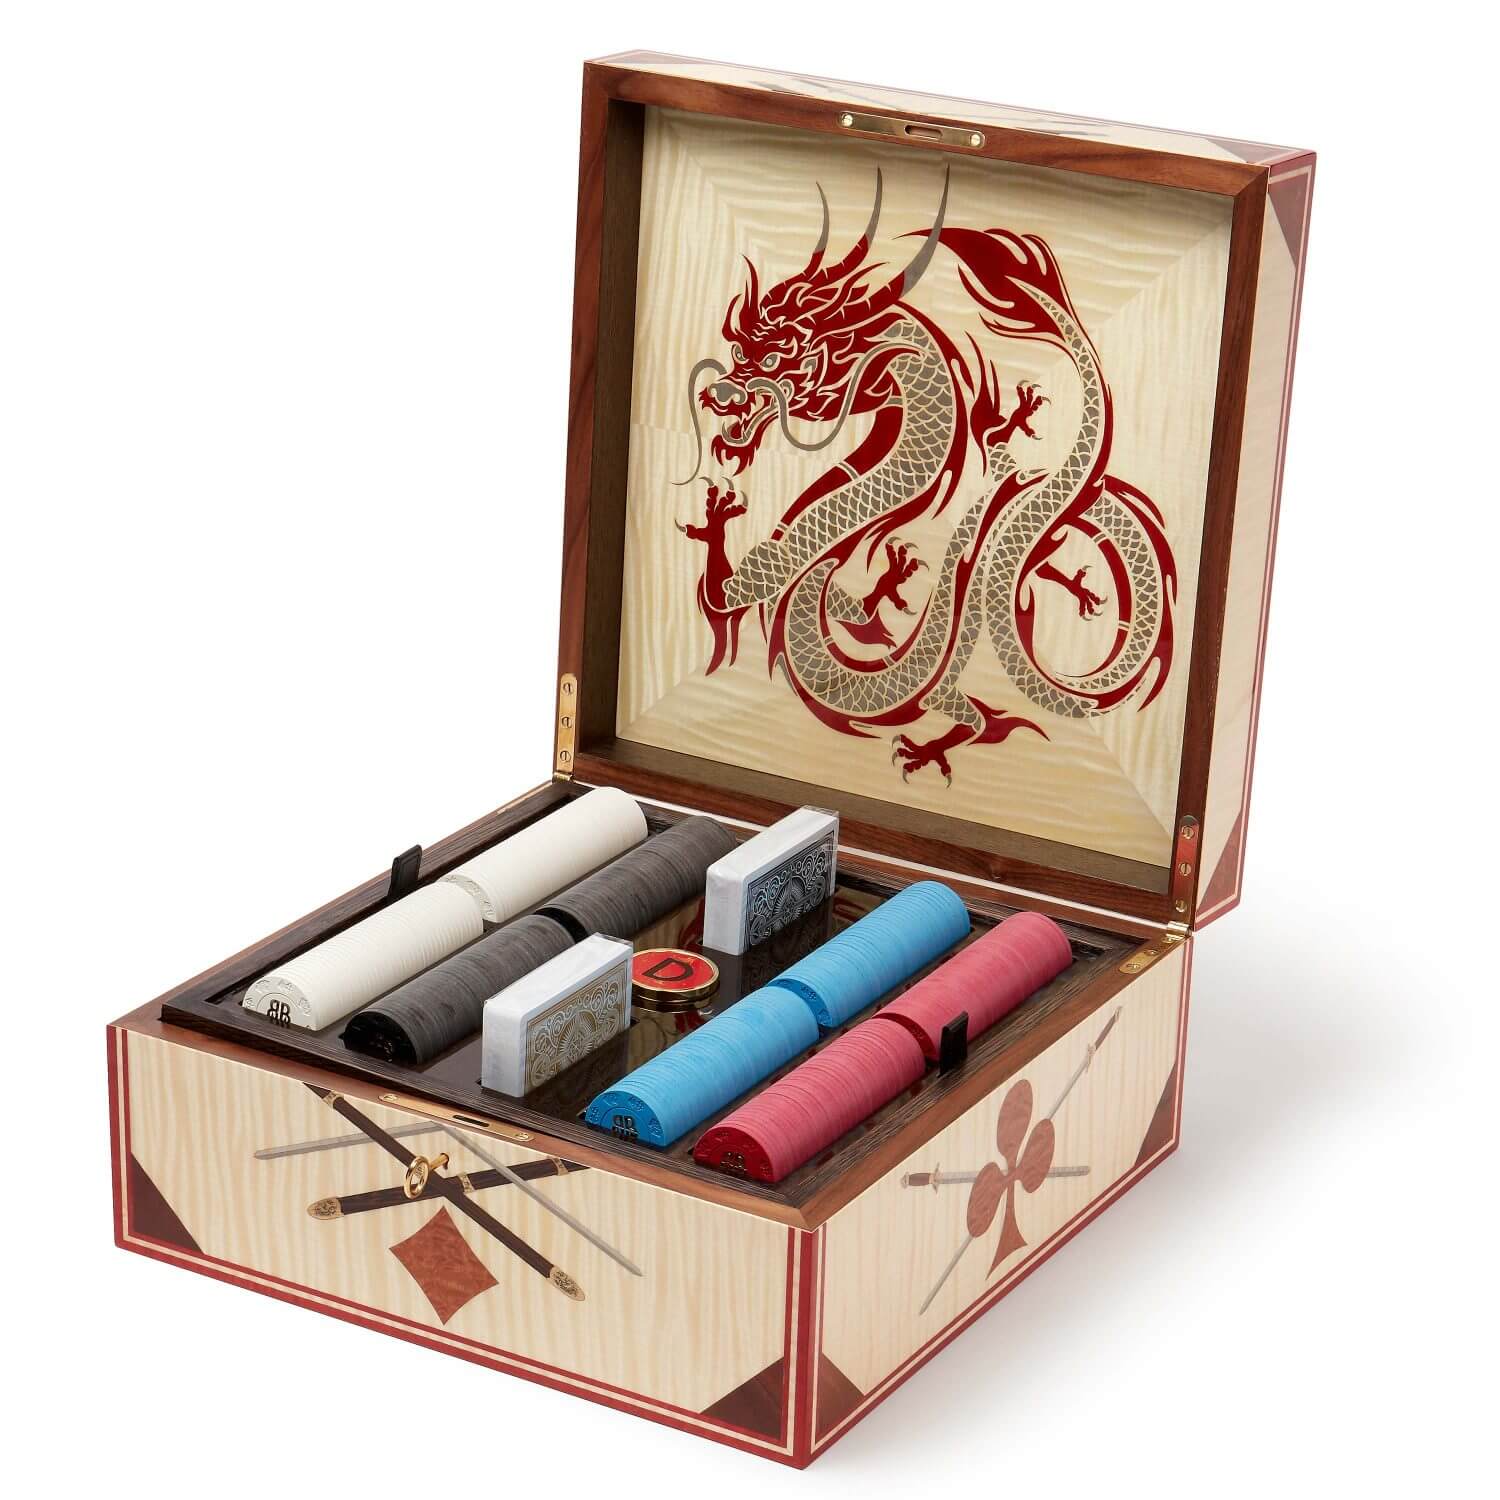 Bespoke marquetry poker box with red dragon on the inner lid